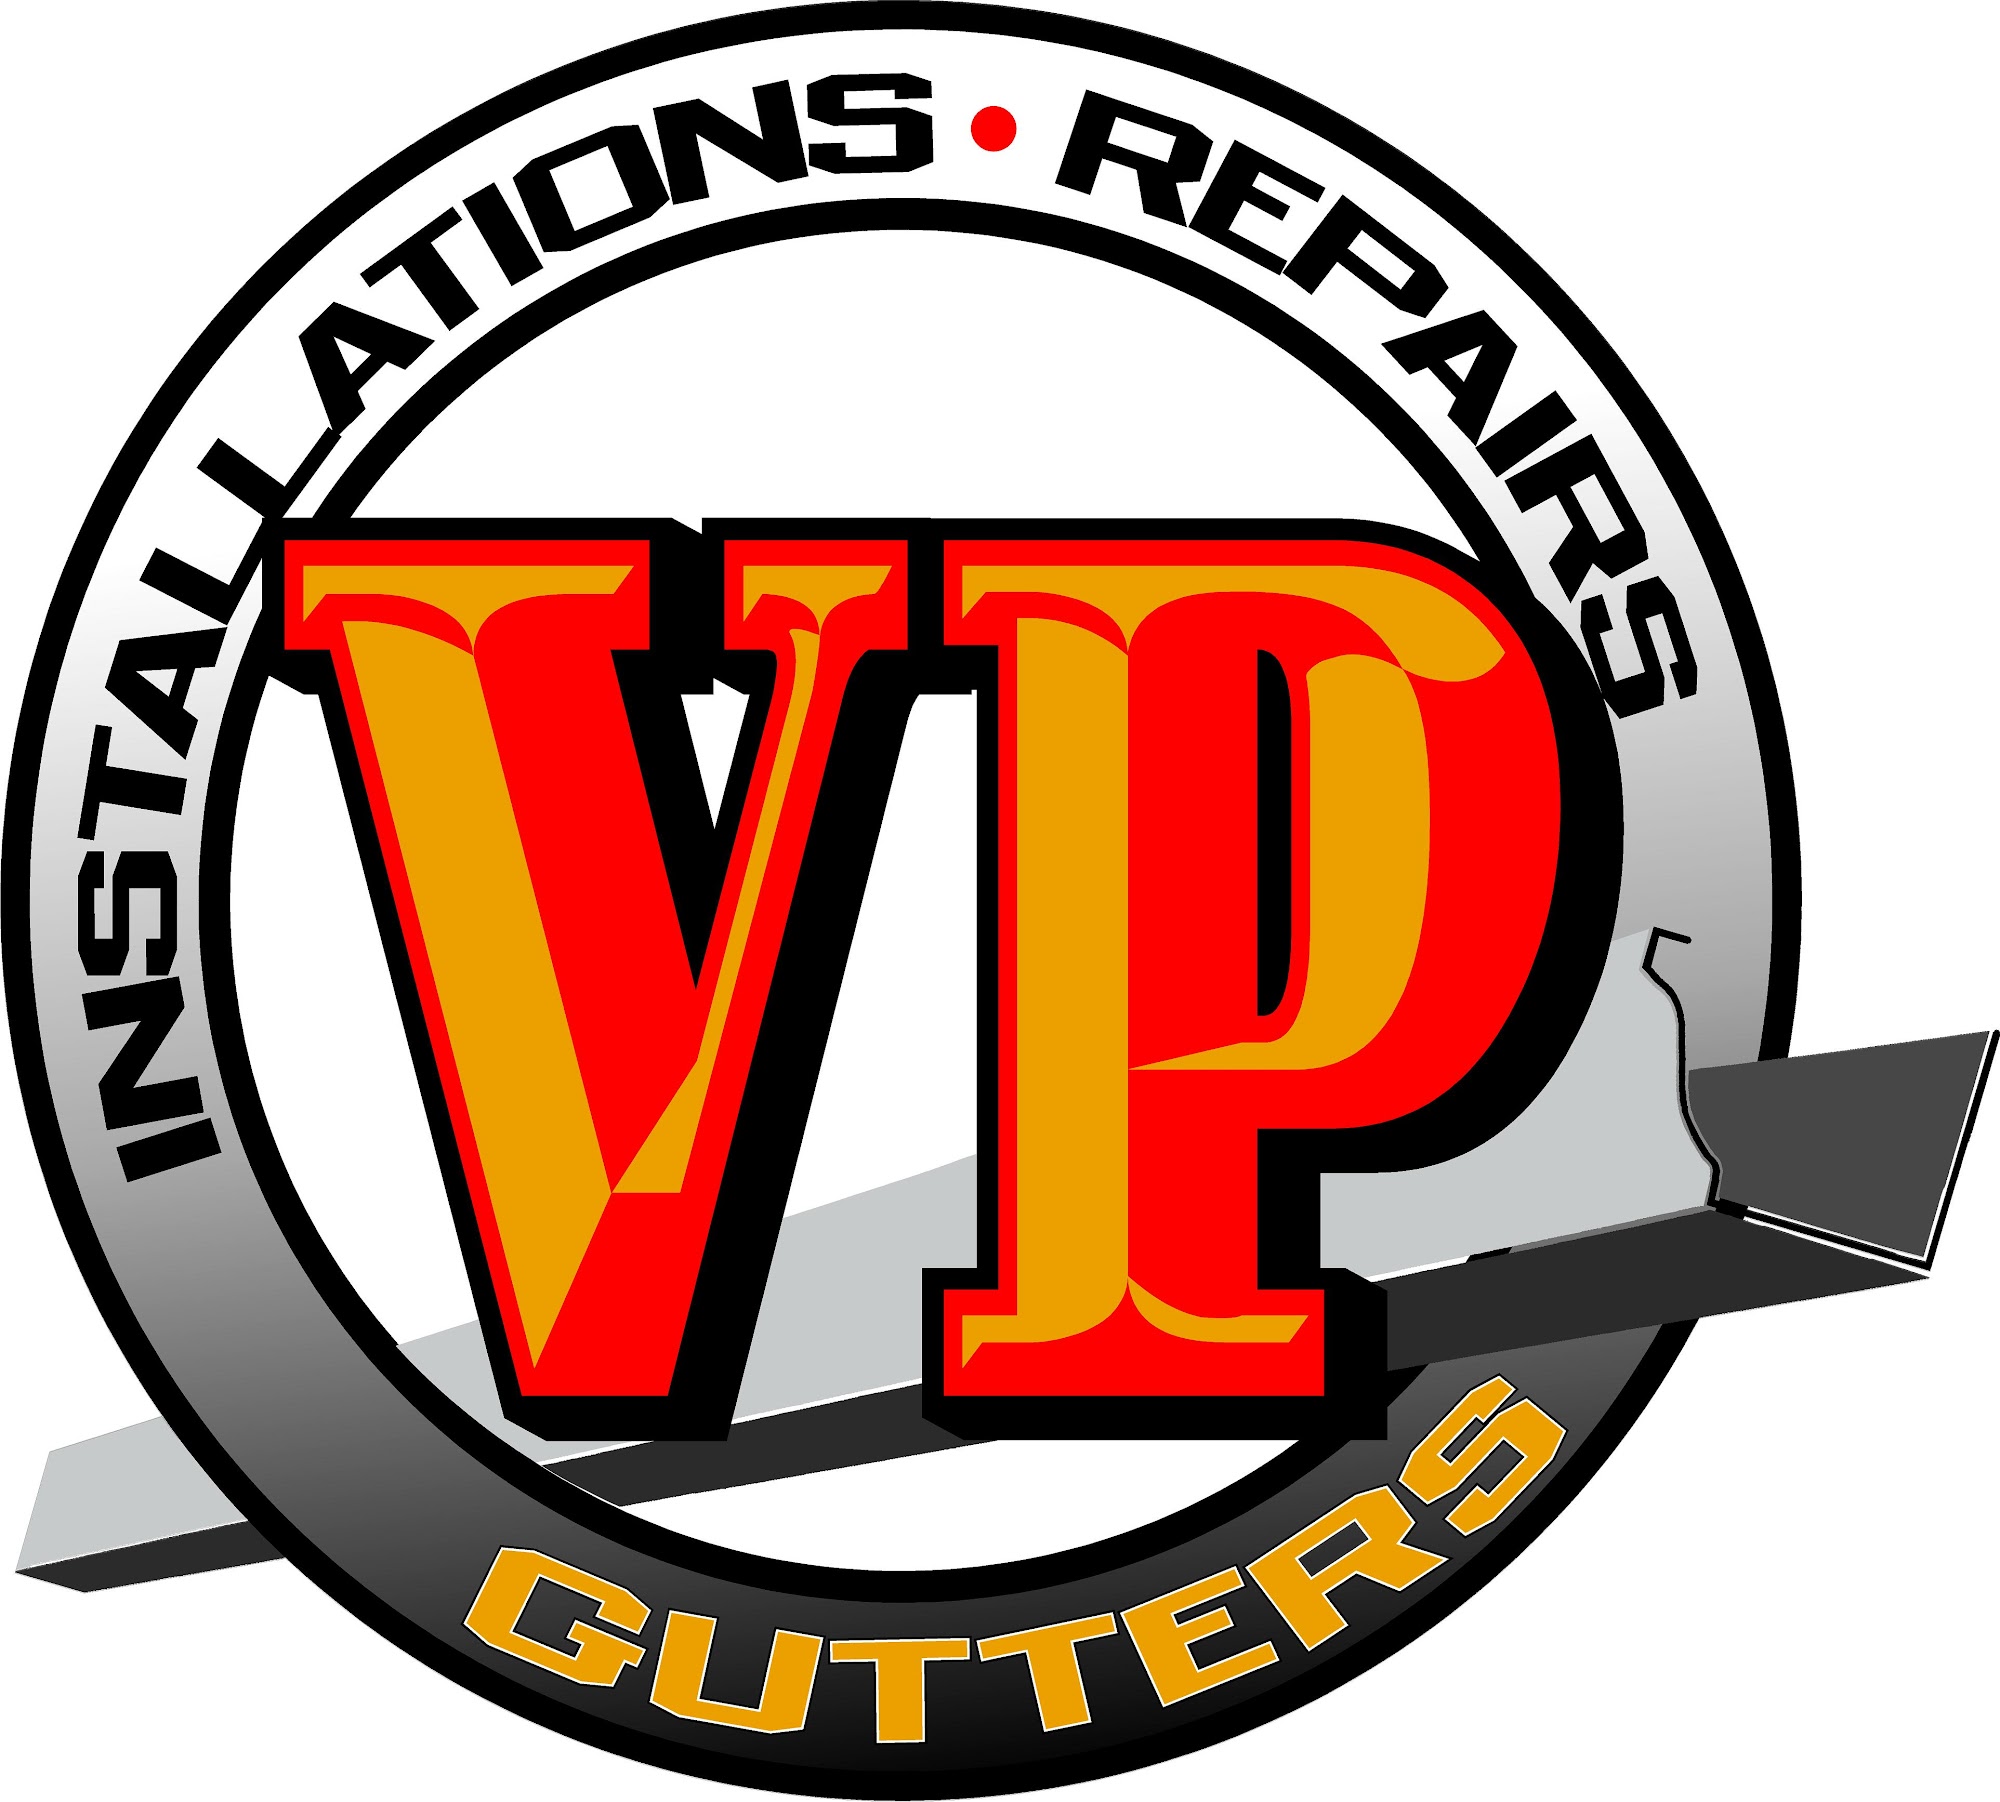 VP Gutter Cleaning & Pressure Washing Services